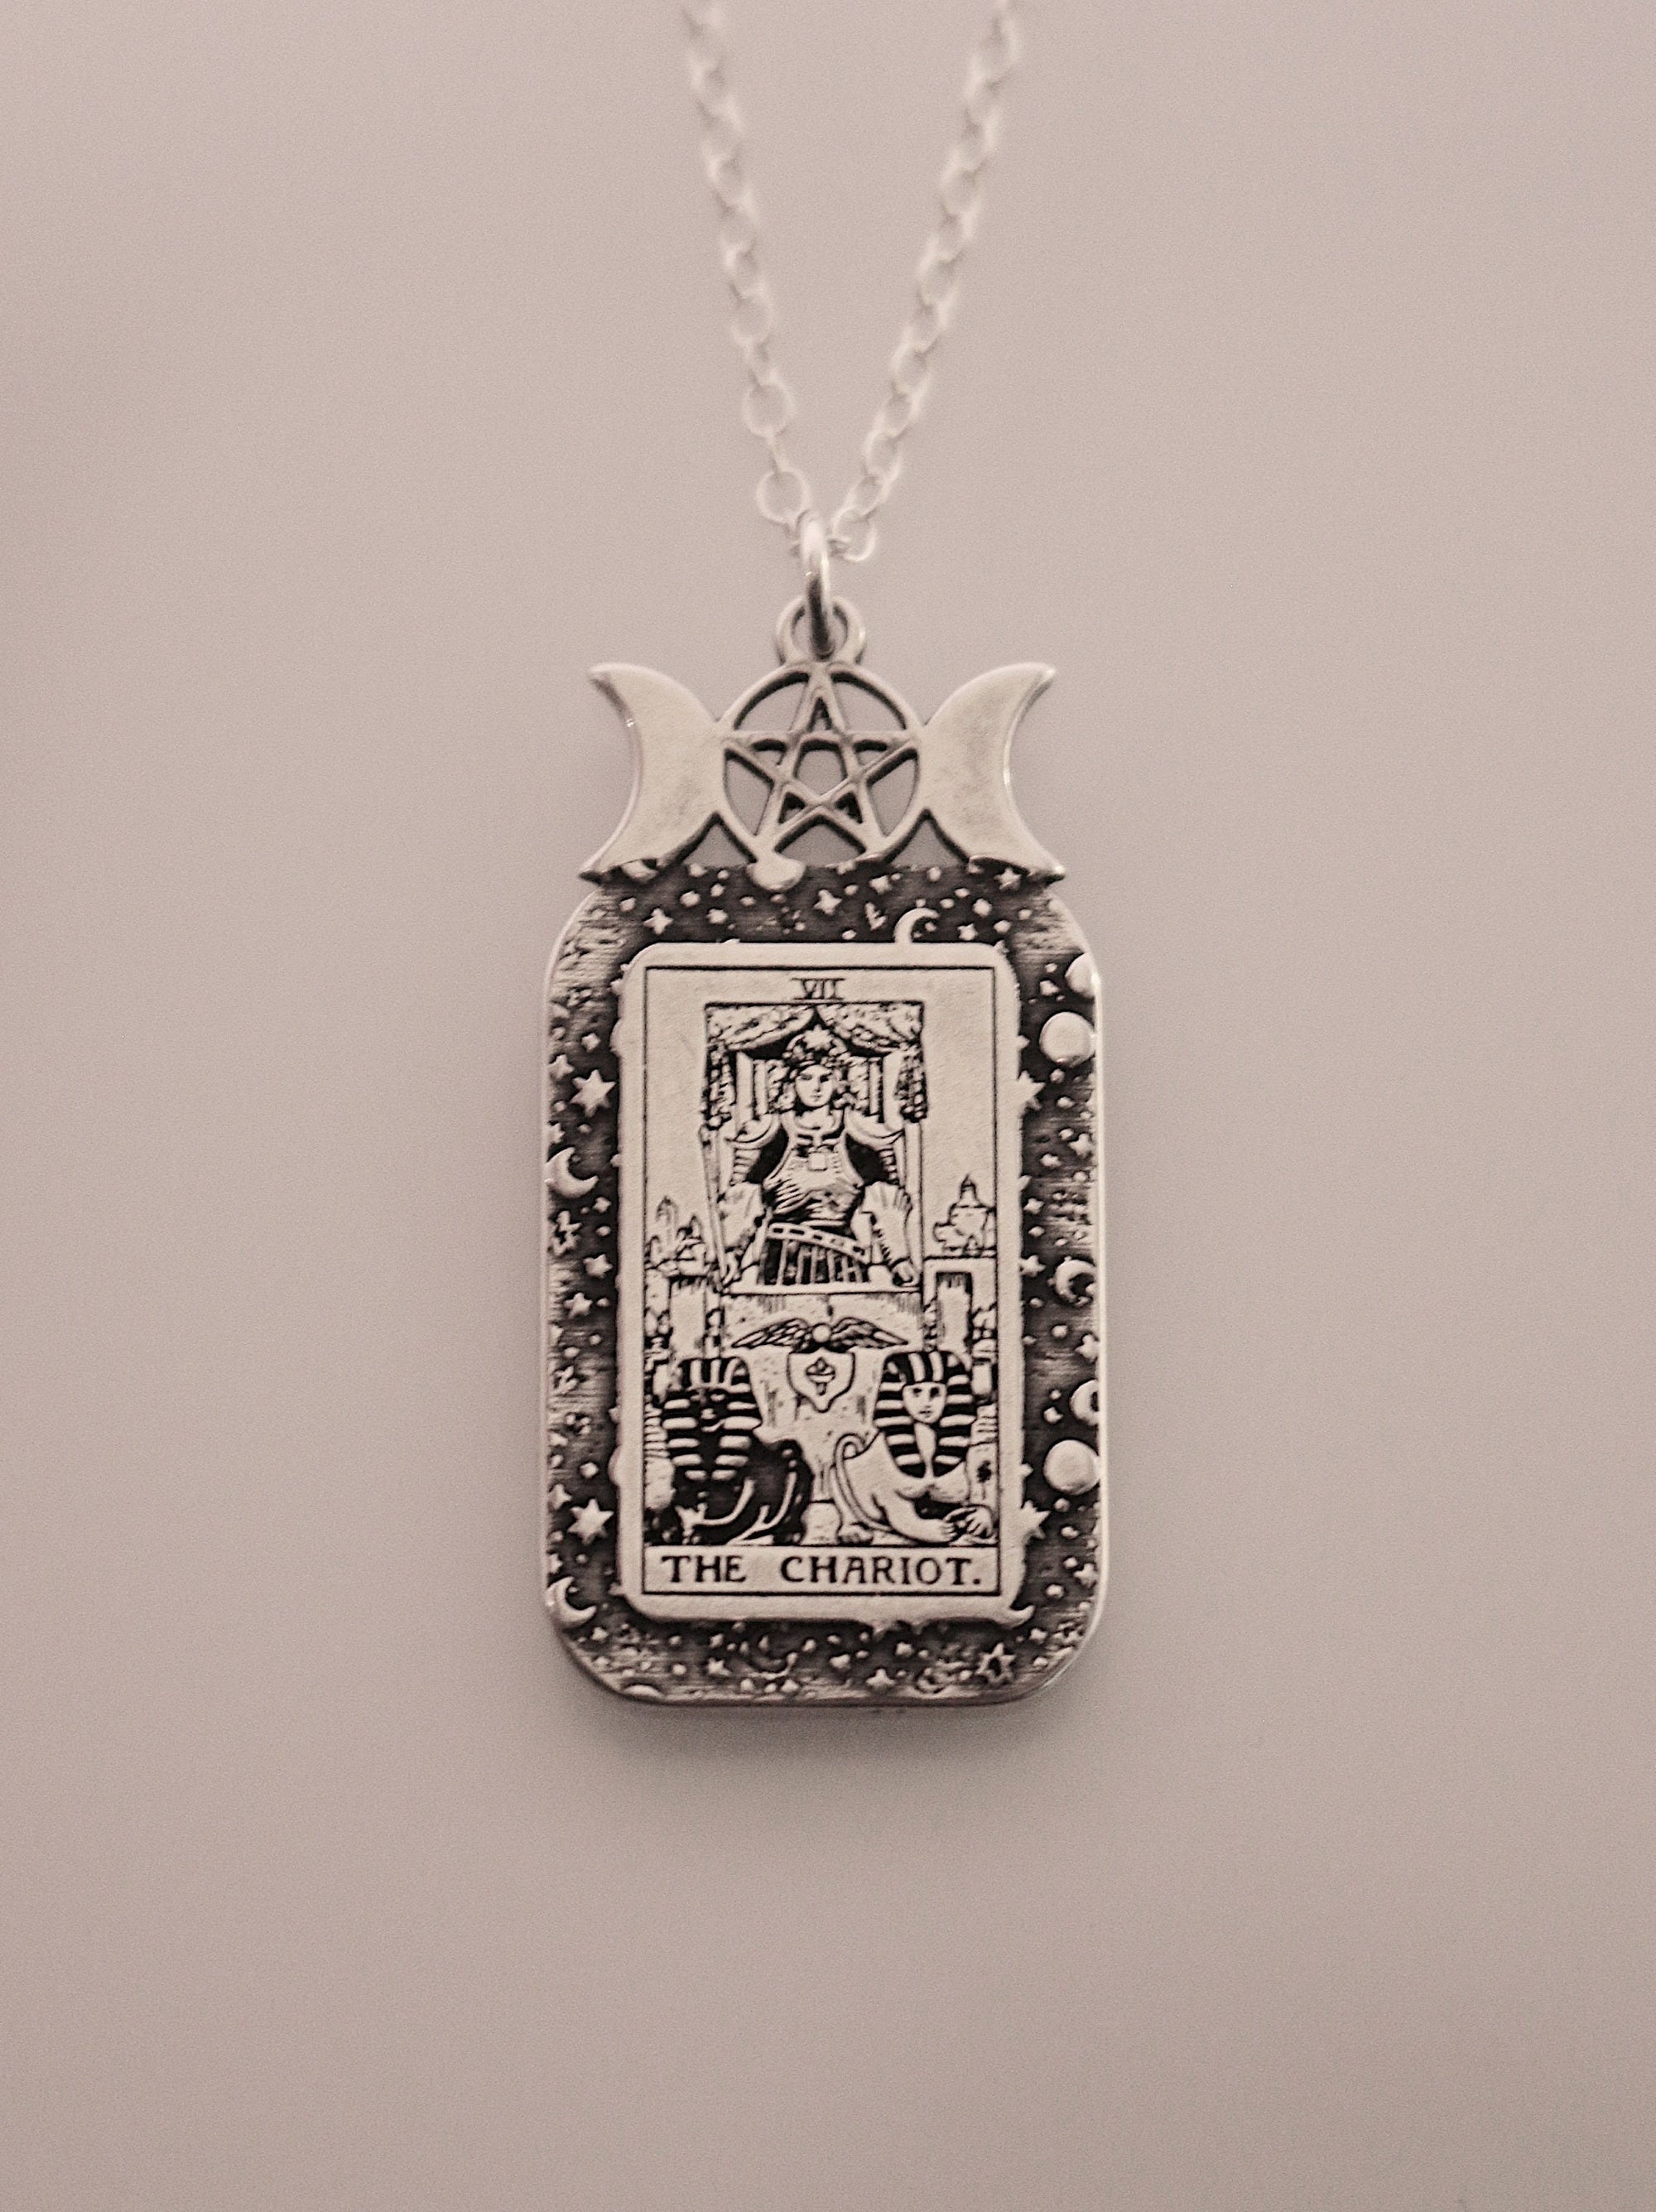 The Chariot Tarot Card Necklace | Best Friend Birthday Gift | Tarot Card Necklace | Celestial Triple Moon Goddess Jewelry | Witch Necklace